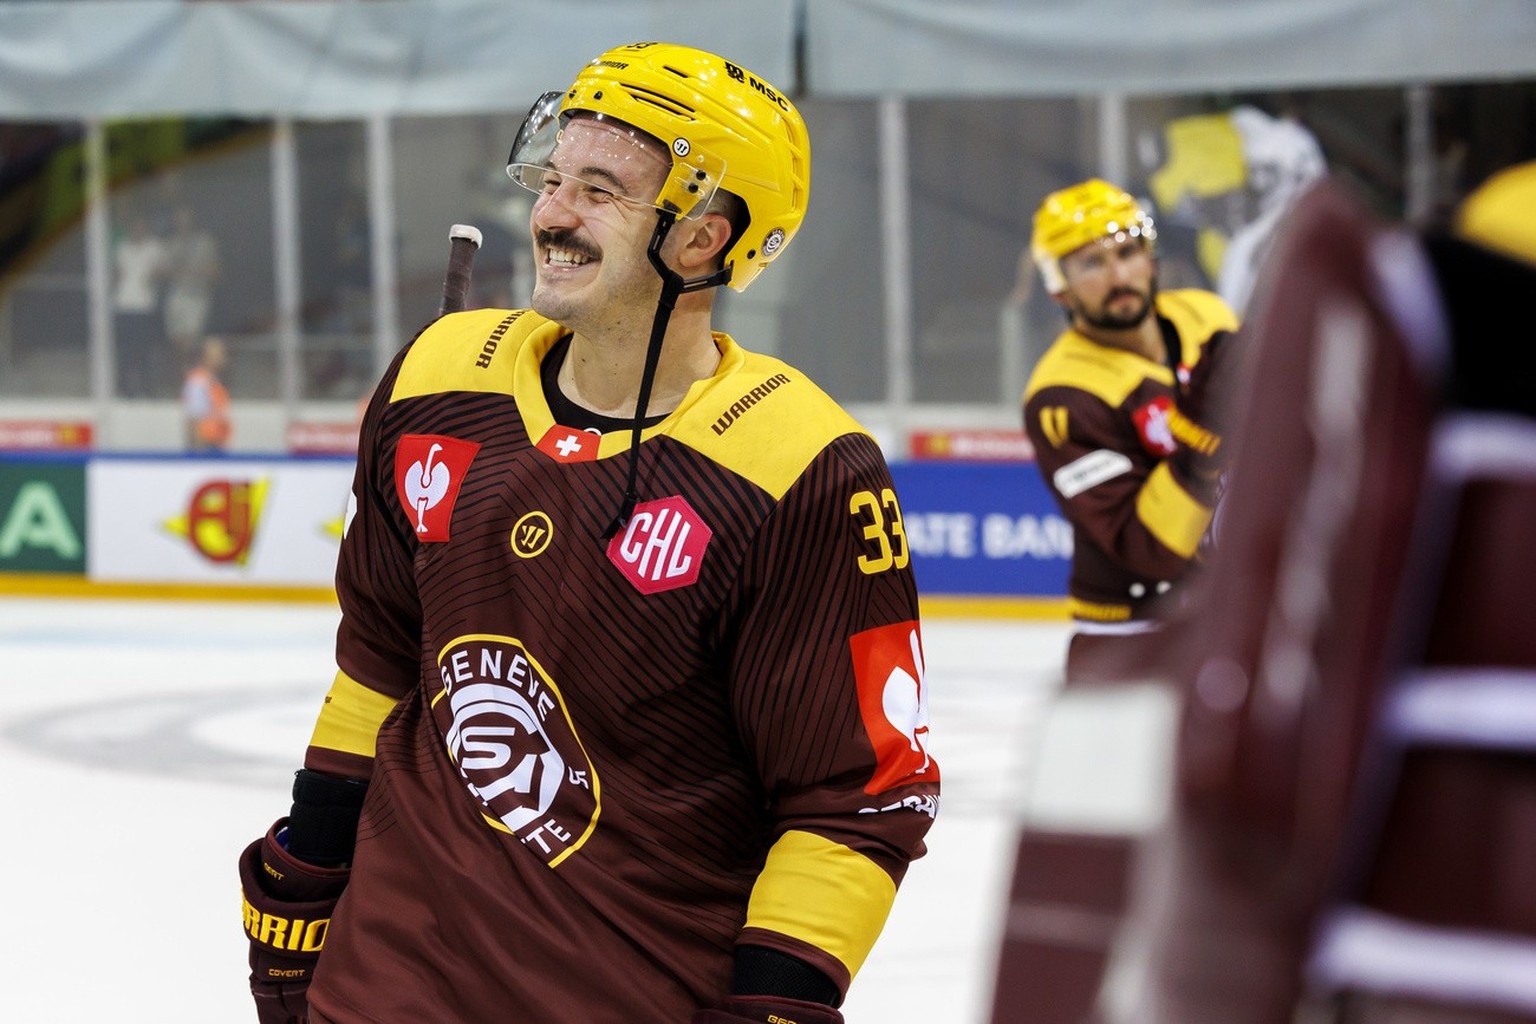 Geneve-Servette&#039;s forward Alessio Bertaggia #33 smiles as winner after defeating the team Rouen Dragons, during a Champions Hockey League game between Switzerland&#039;s Geneve-Servette HC and Fr ...